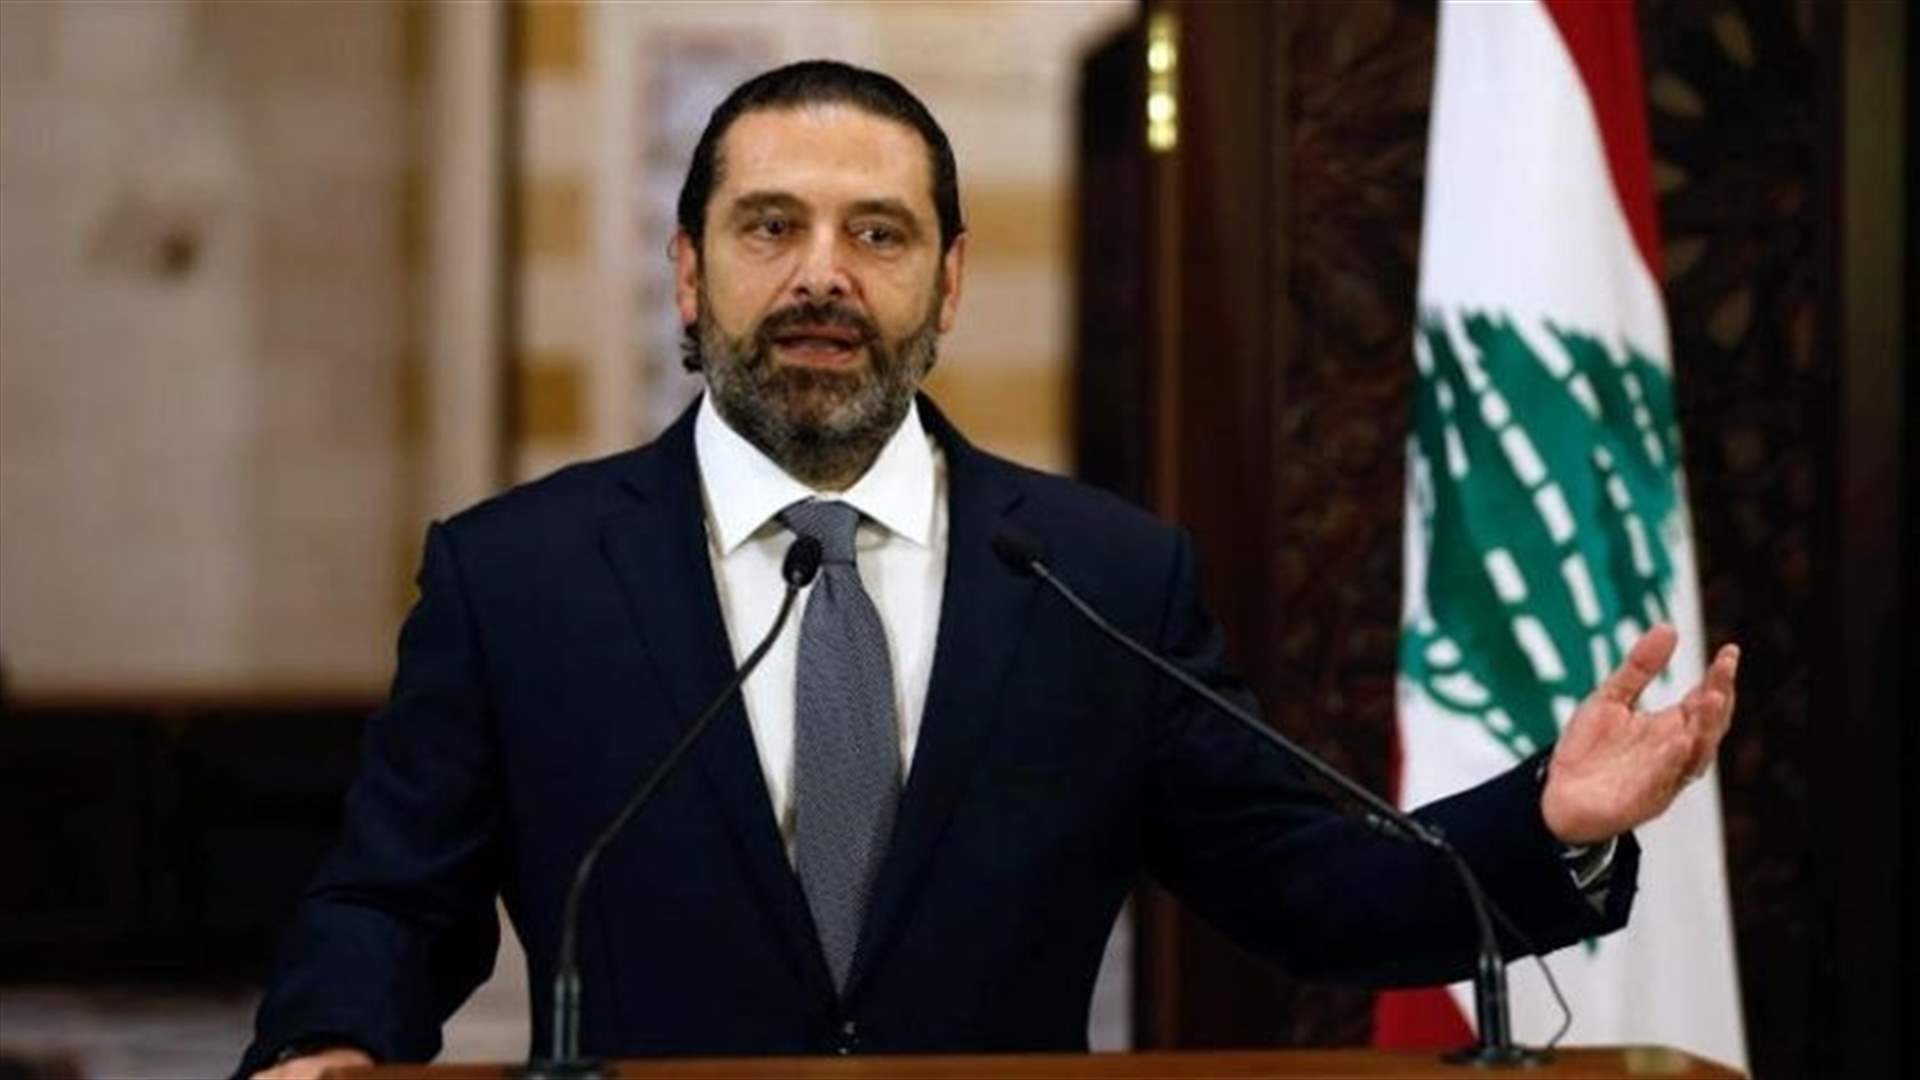 Hariri calls army commander: Protesters should be protected and roads opened